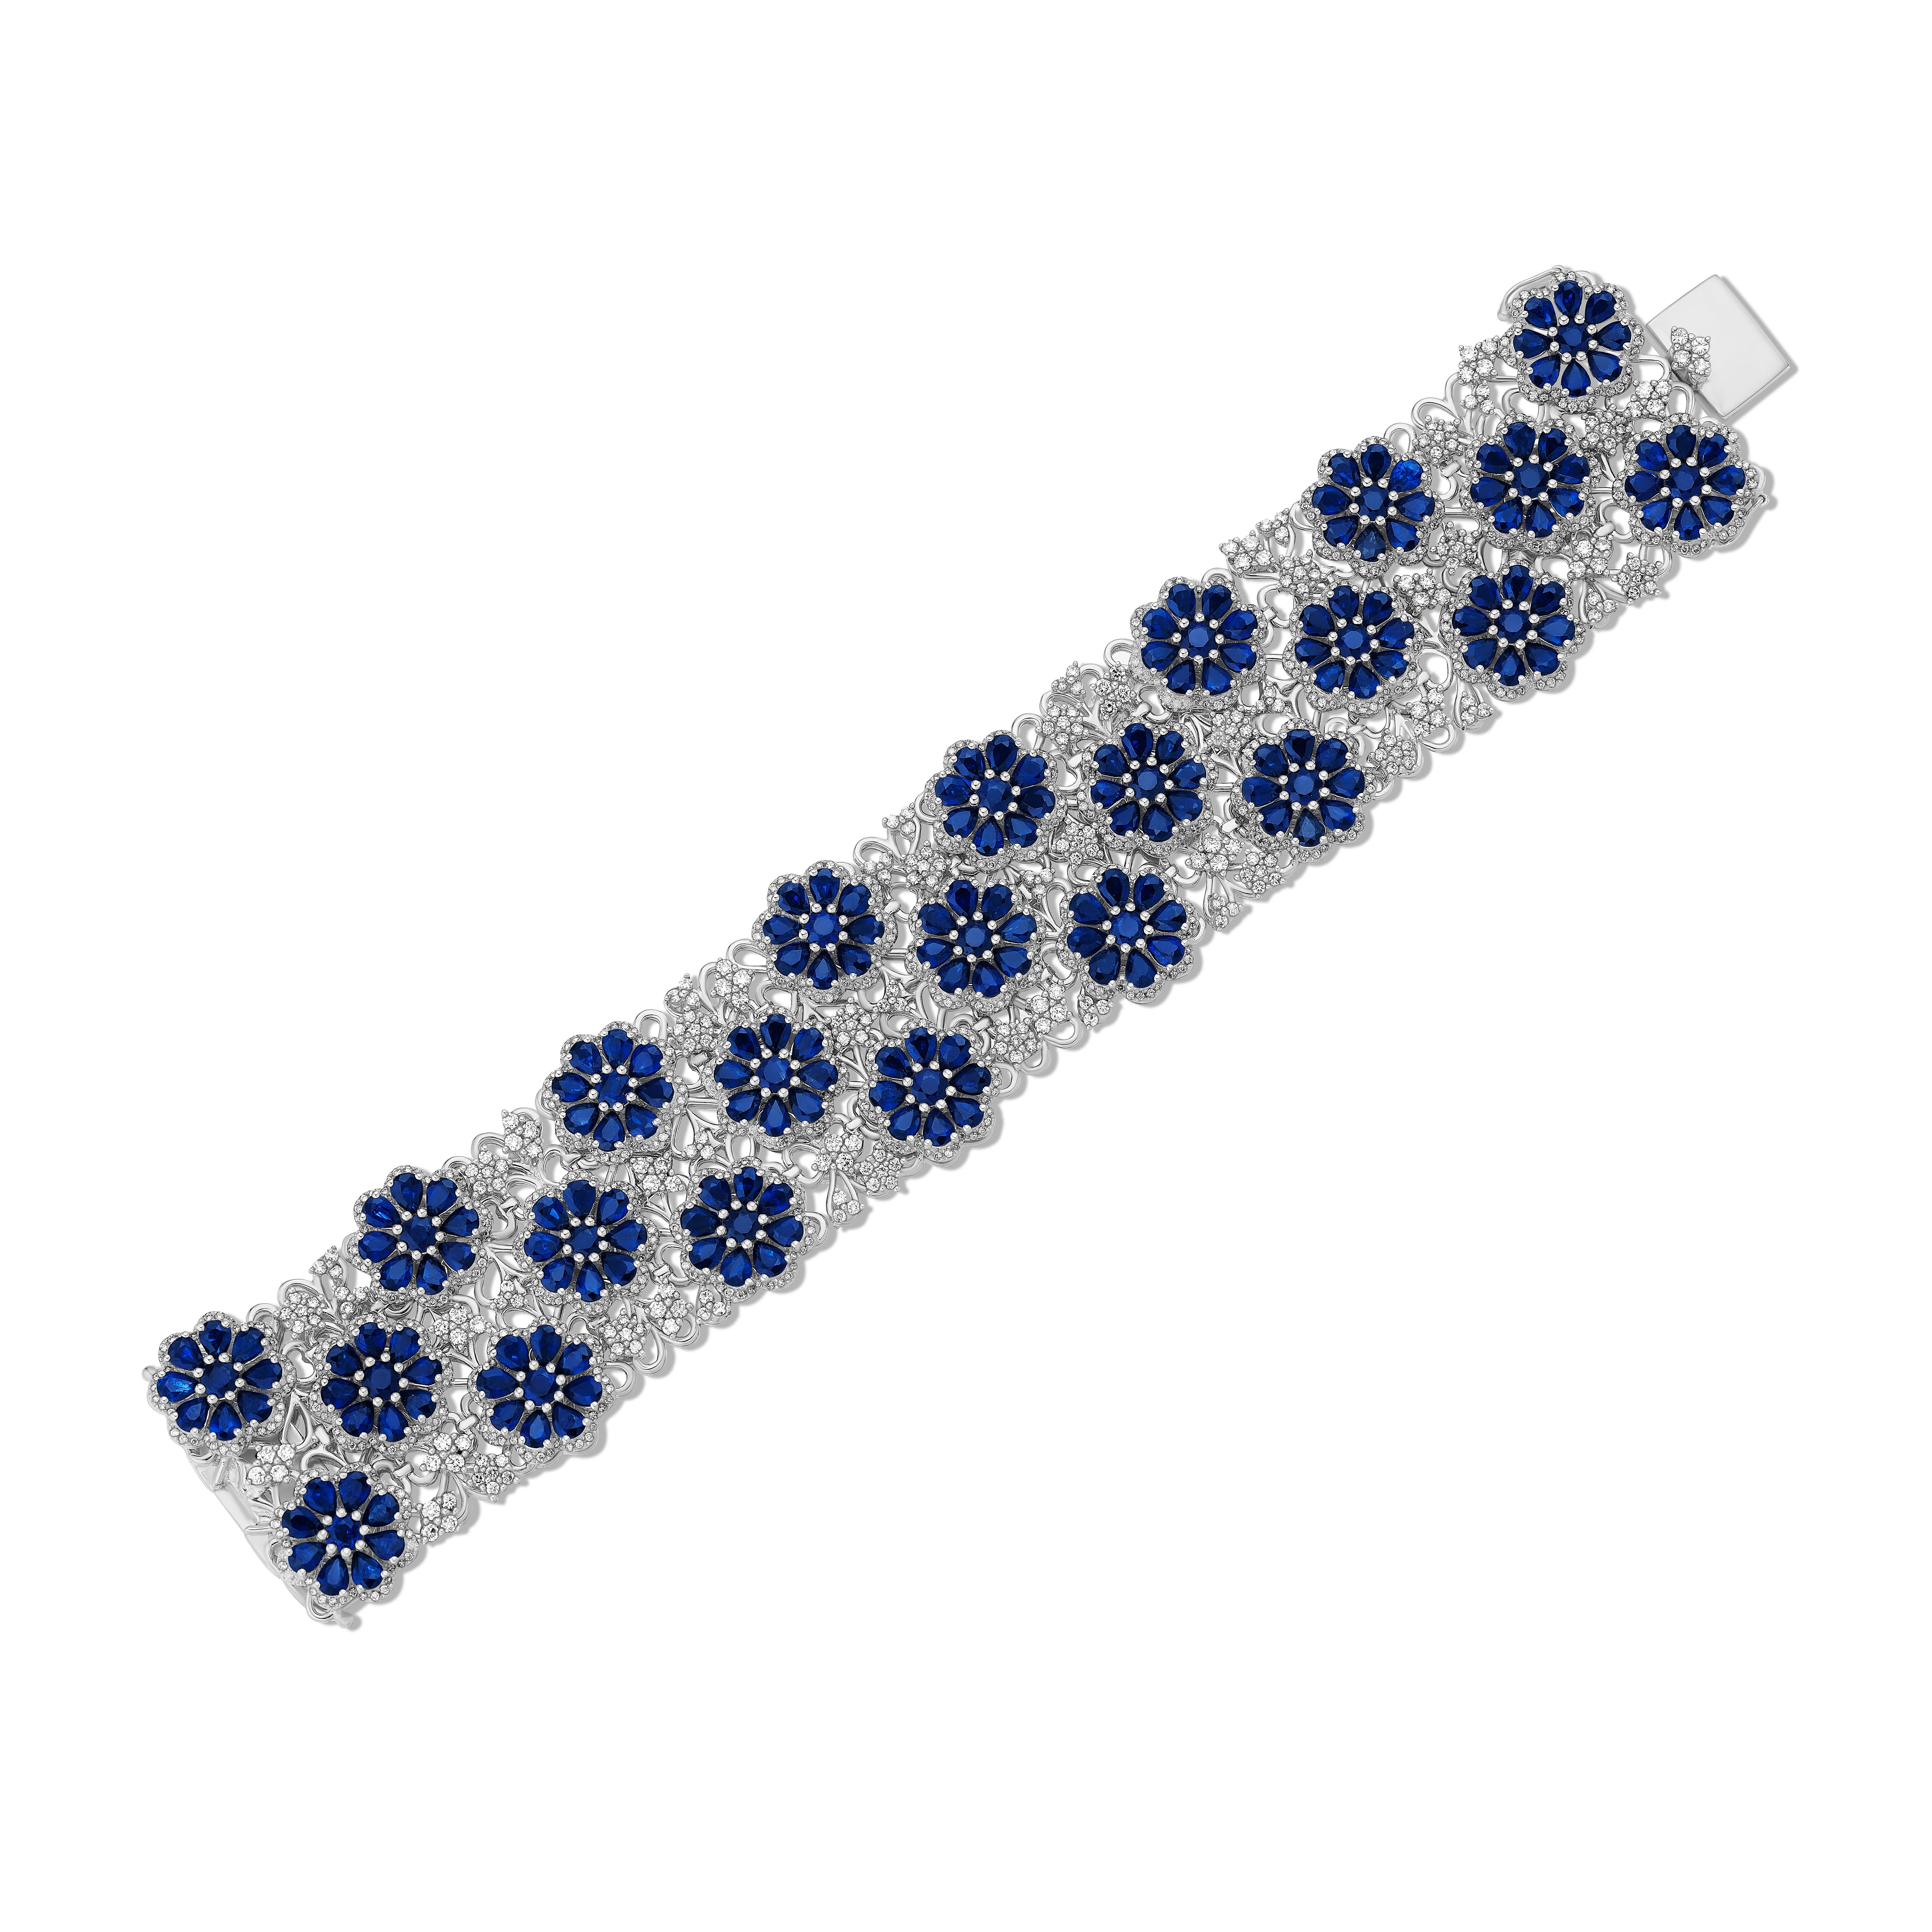 •	A truly exquisite combination of blue sapphires & white diamond encircles the wrist in this one-of-a-kind bracelet. Comprised with over 55 carats of sapphires and diamonds, this bracelet was made to depict the elegance and beauty of nature and